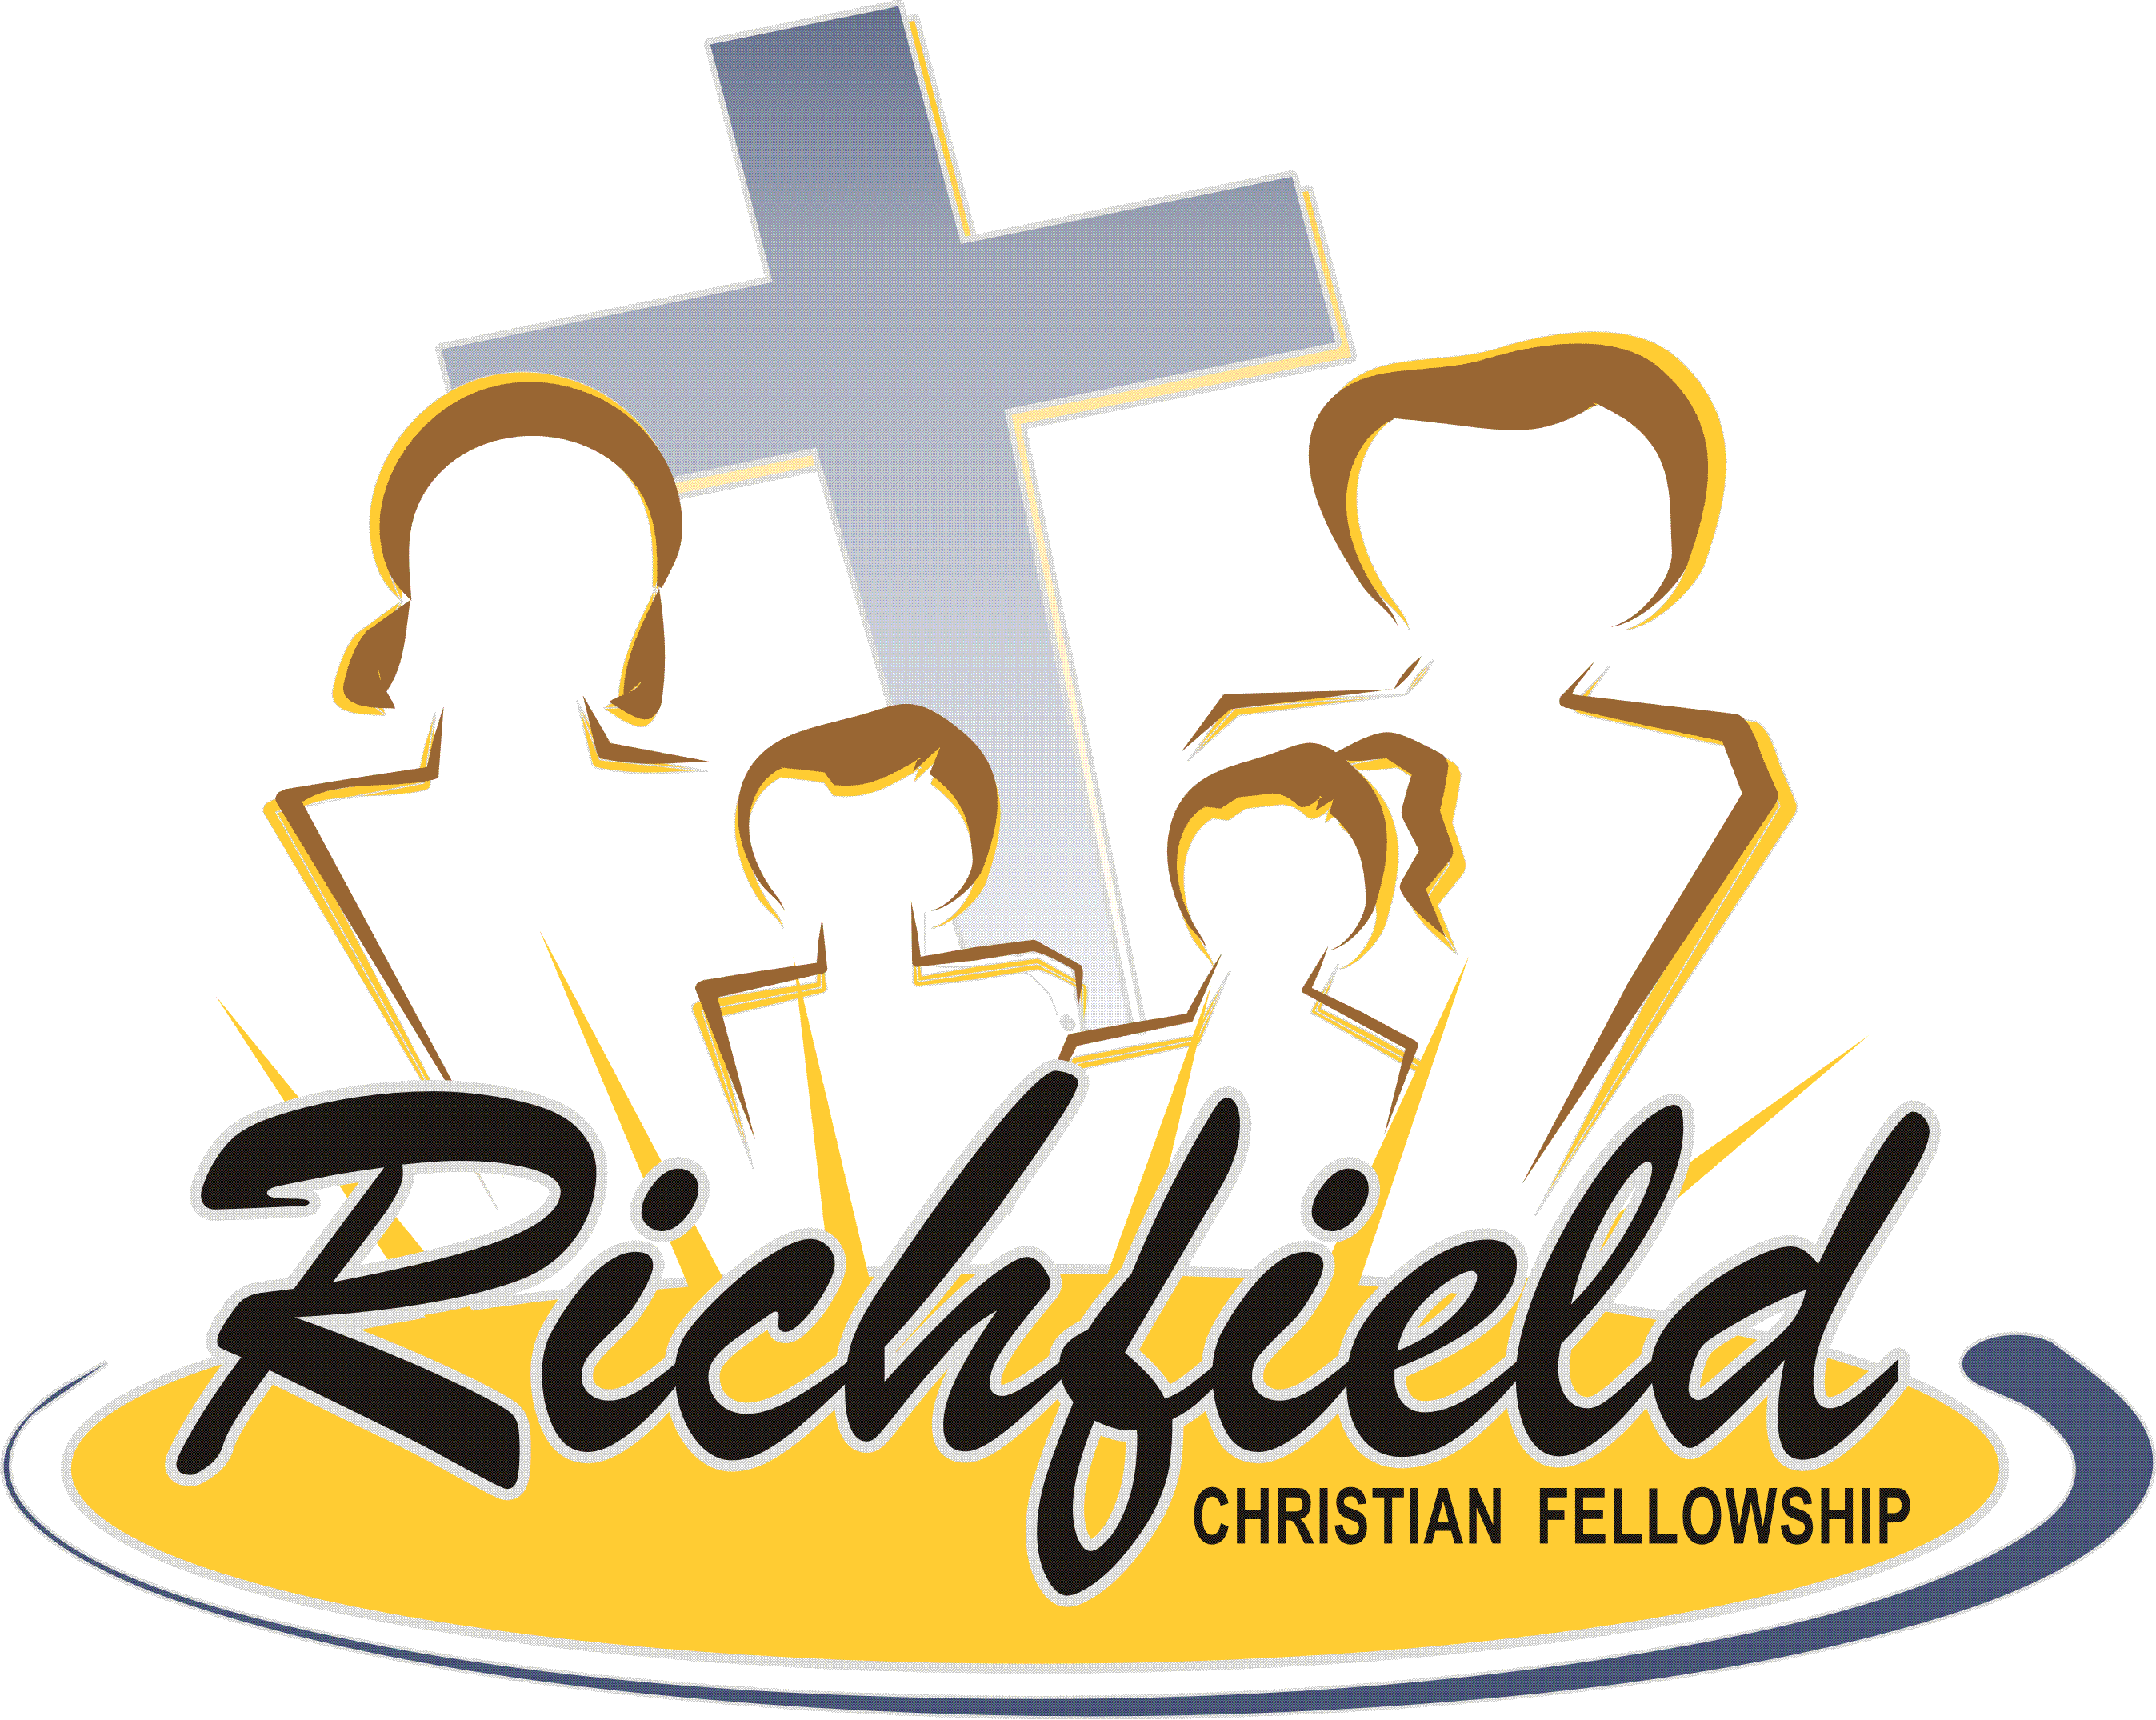 Wednesday clipart church fellowship. Collection of free fellowshiped